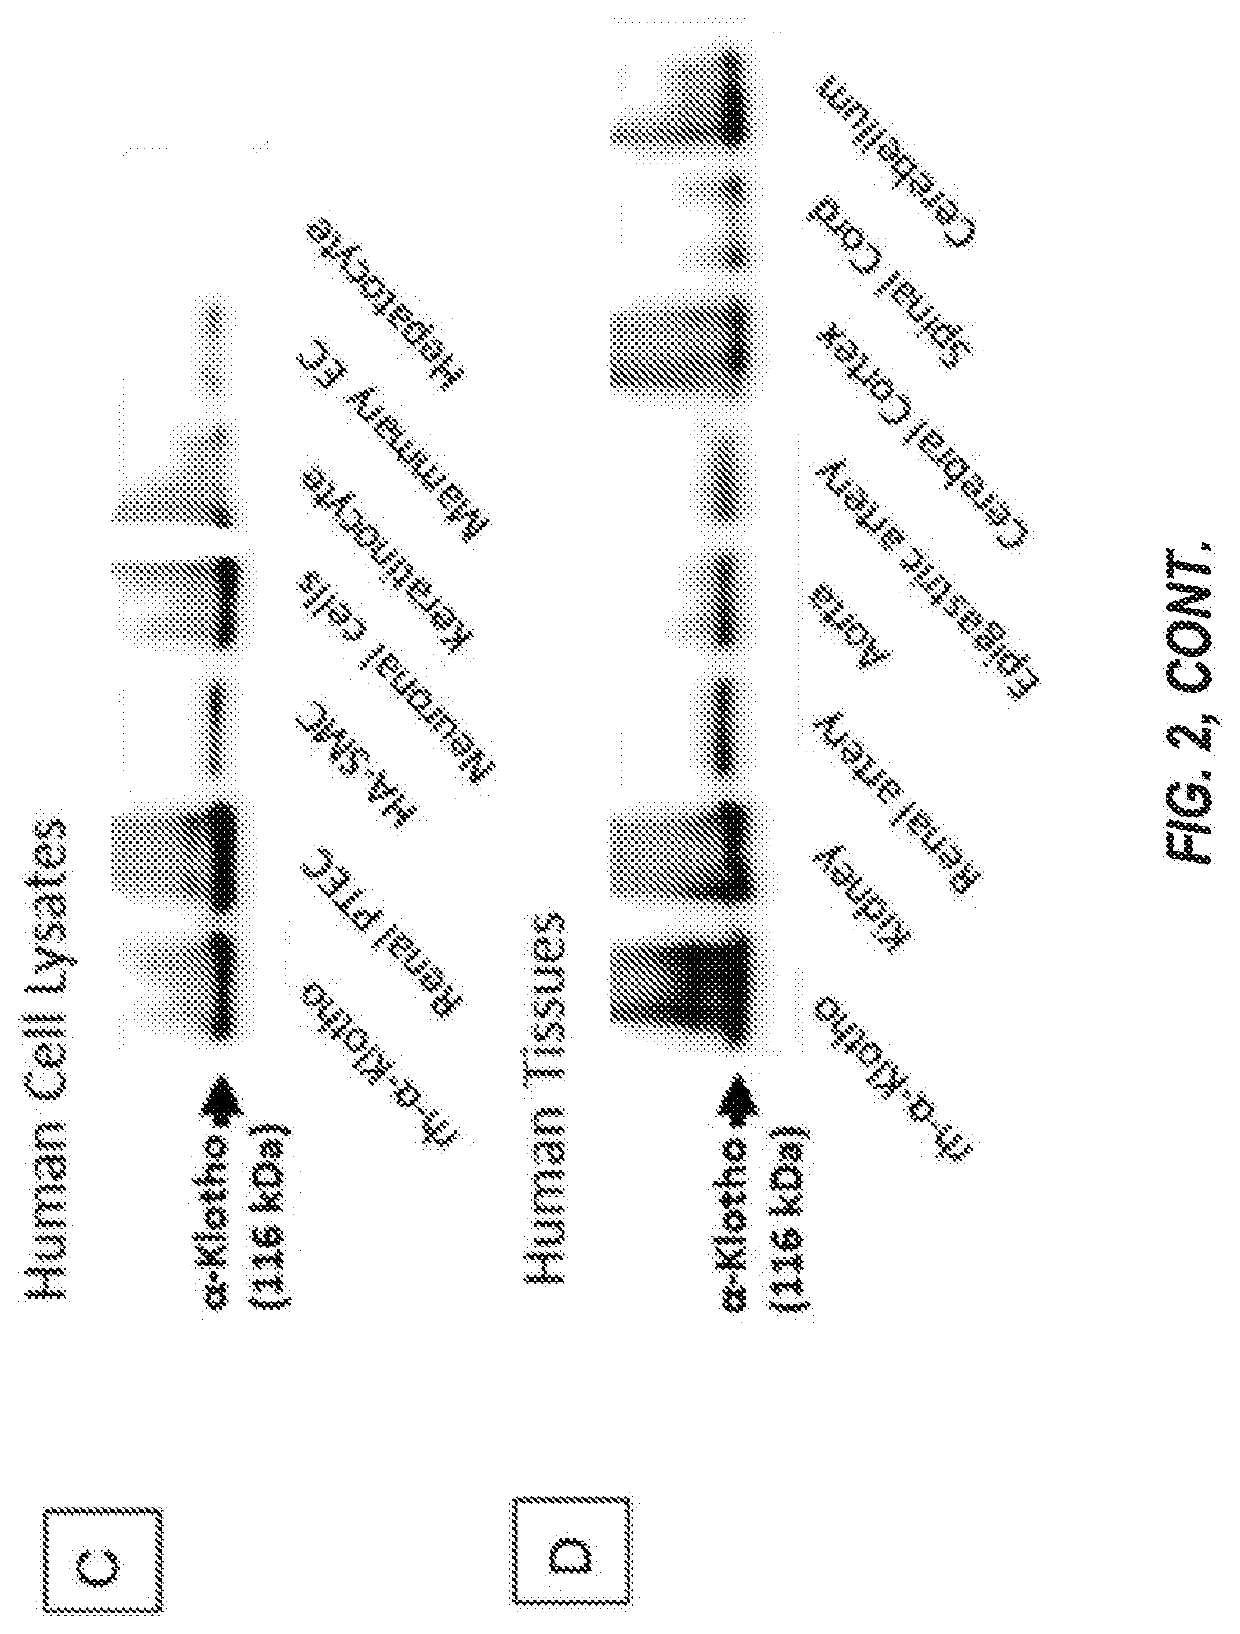 Products and Methods for Assessing and Increasing Klotho Protein Levels